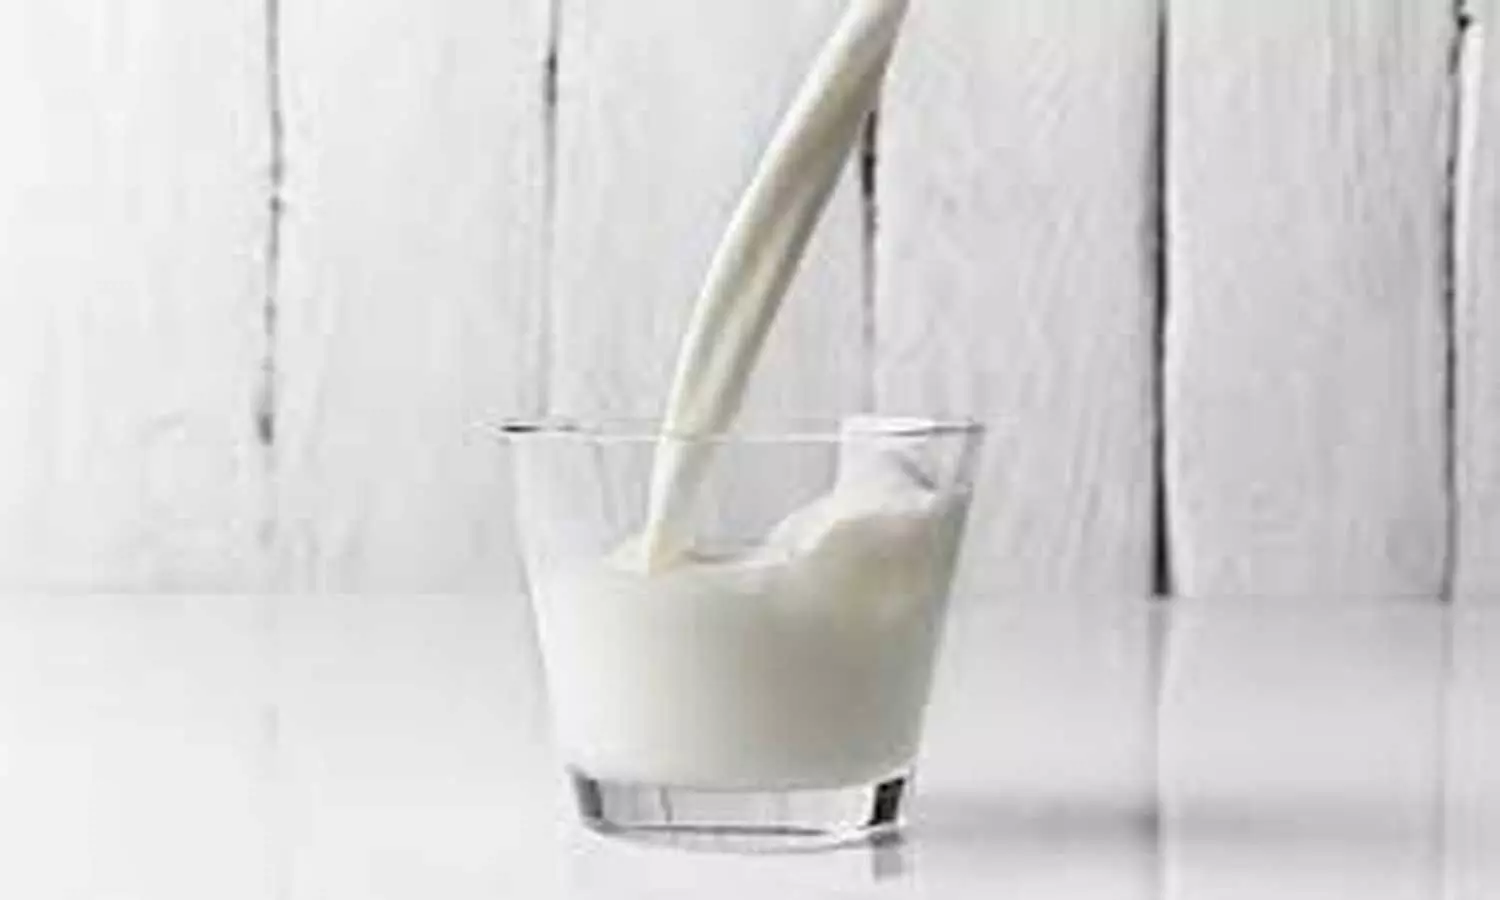 Consumption of low-fat dairy may lower MetS risk in adolescents: Study